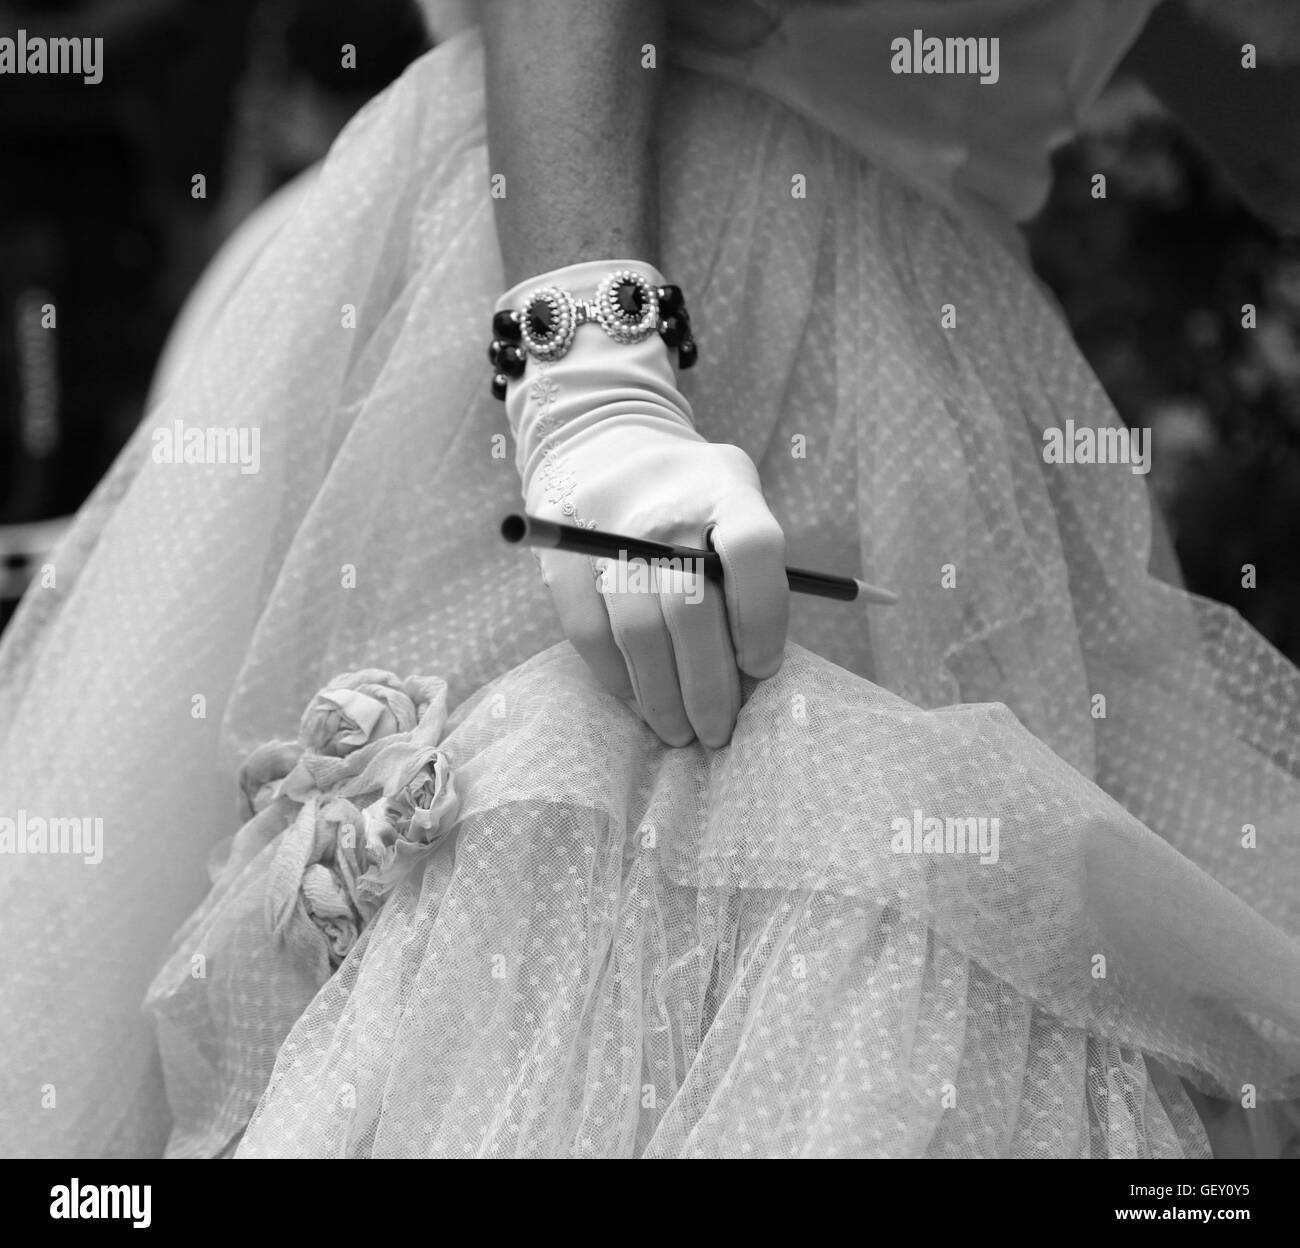 white glovers of an elegant lady with the cigarette holder and vintage style dress Stock Photo